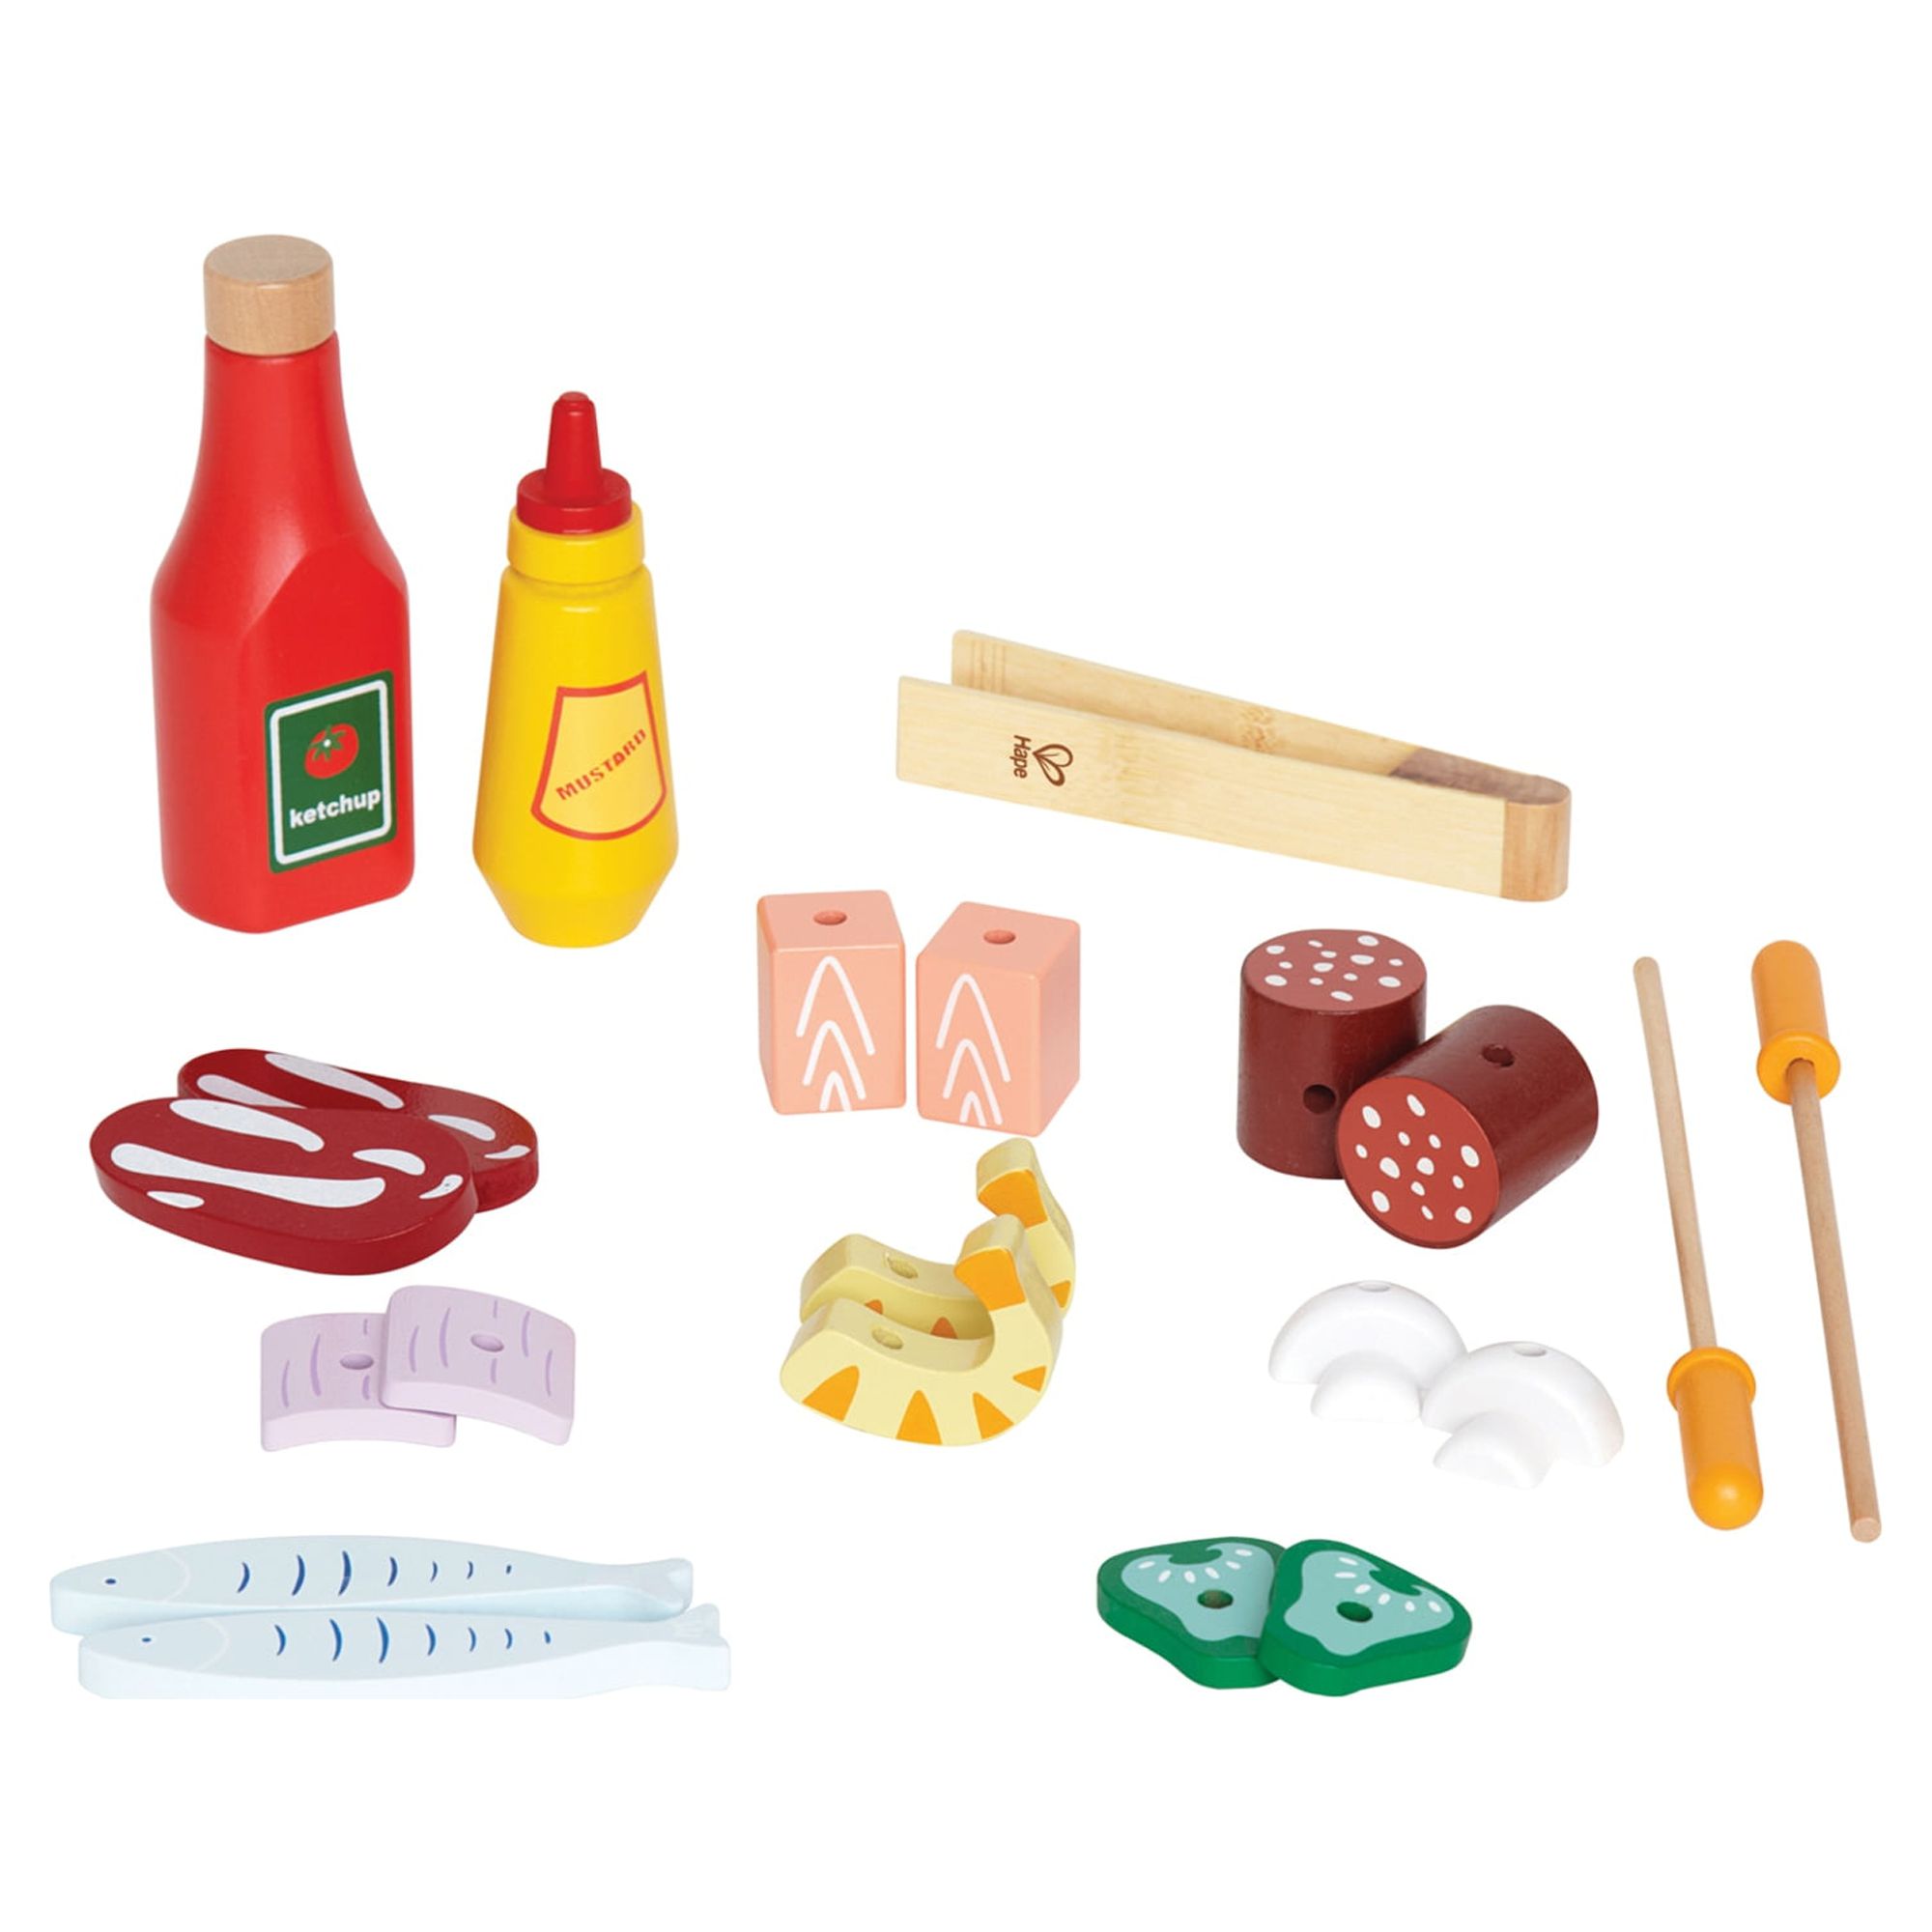 Hape Gourmet Grill Wooden Play Kitchen & Food Accessories, 22 Pieces - image 3 of 7